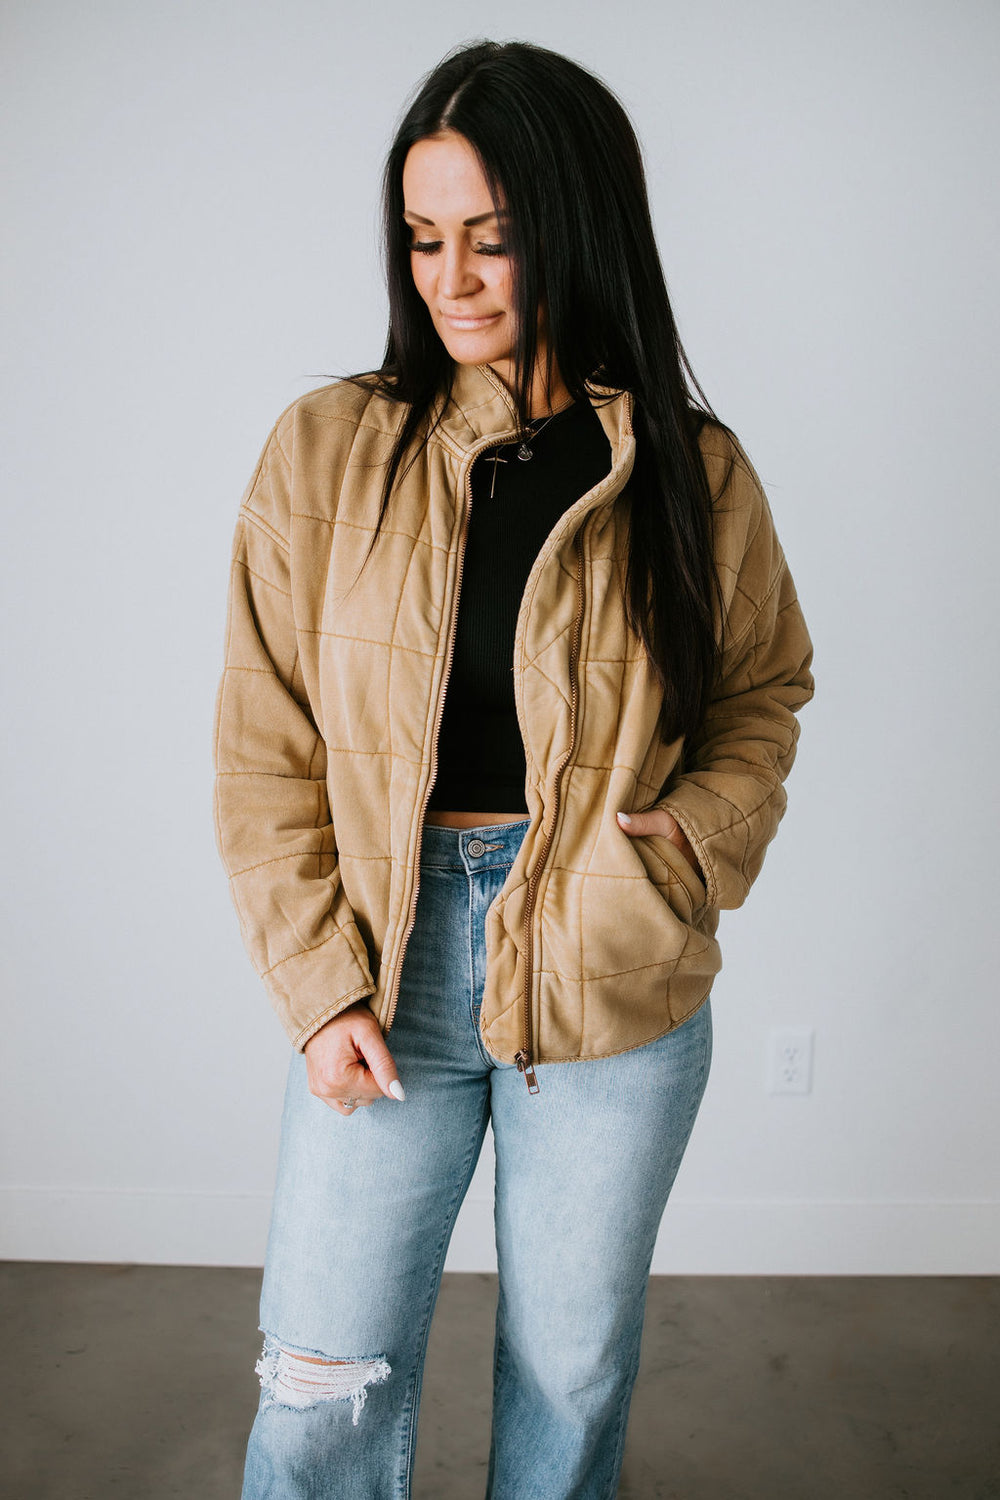 Influencer Lifestyle Quilted Jacket